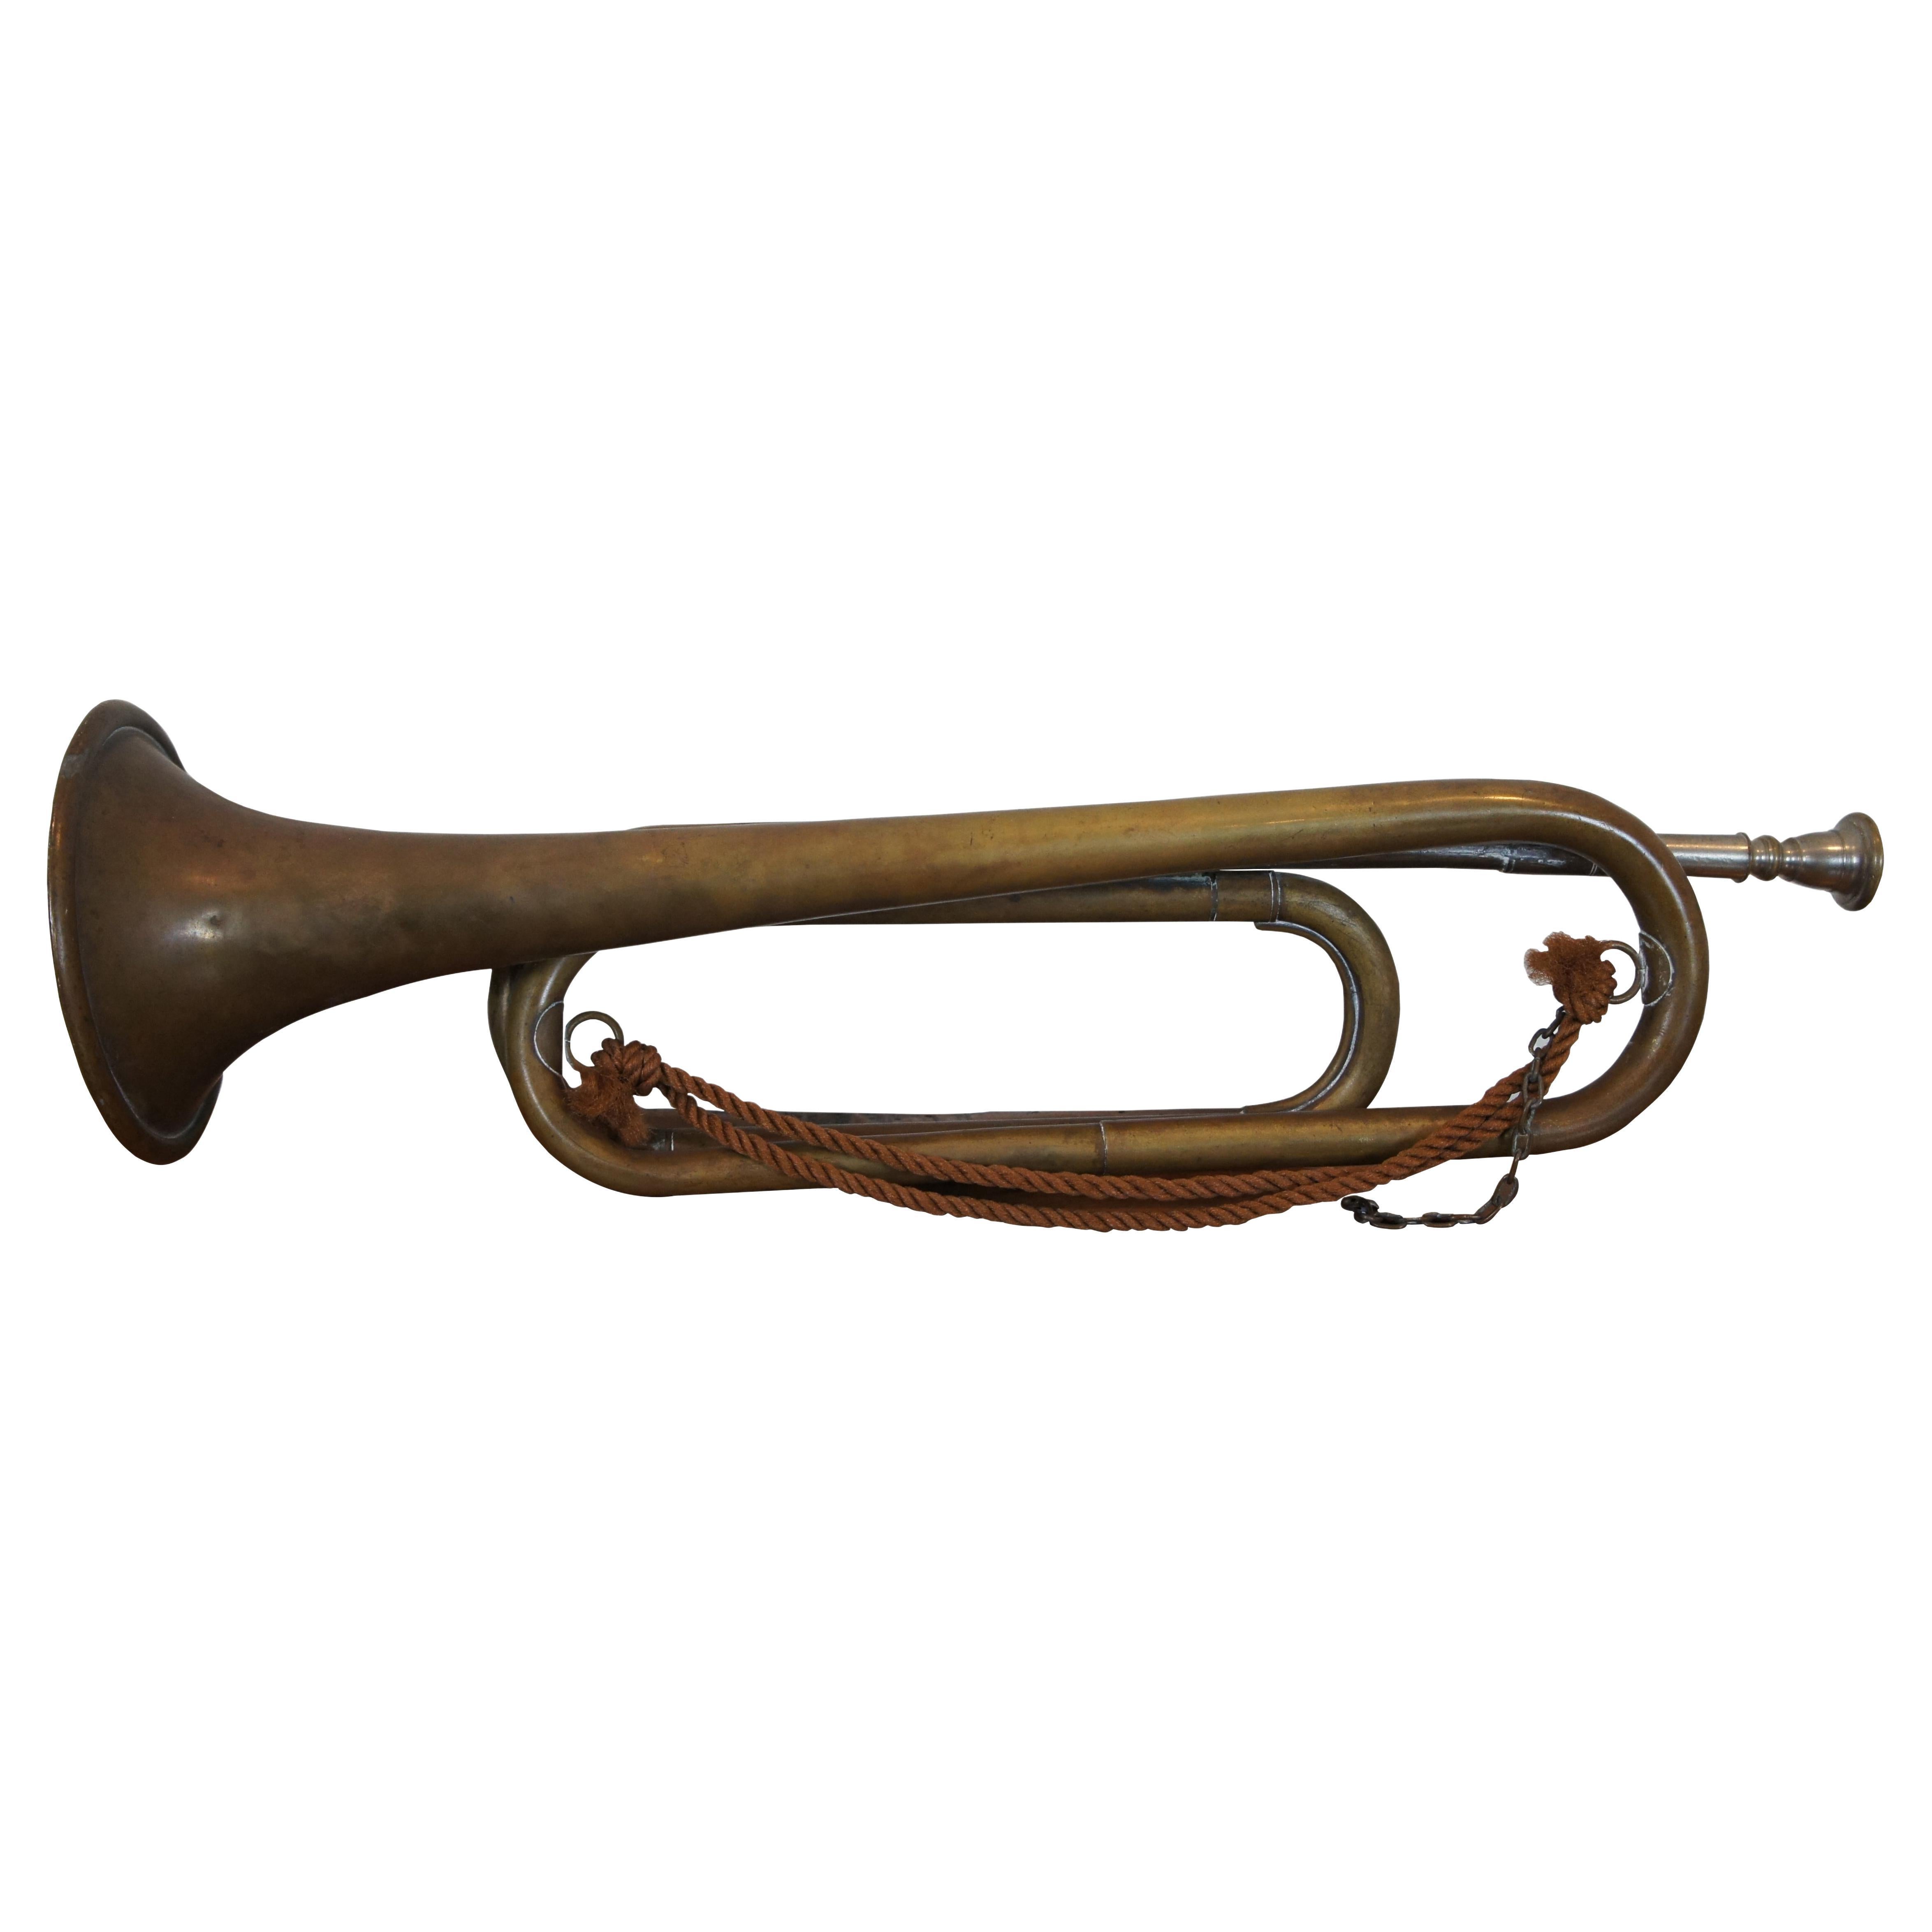 Military Musical Instruments Used - 10 For Sale on 1stDibs